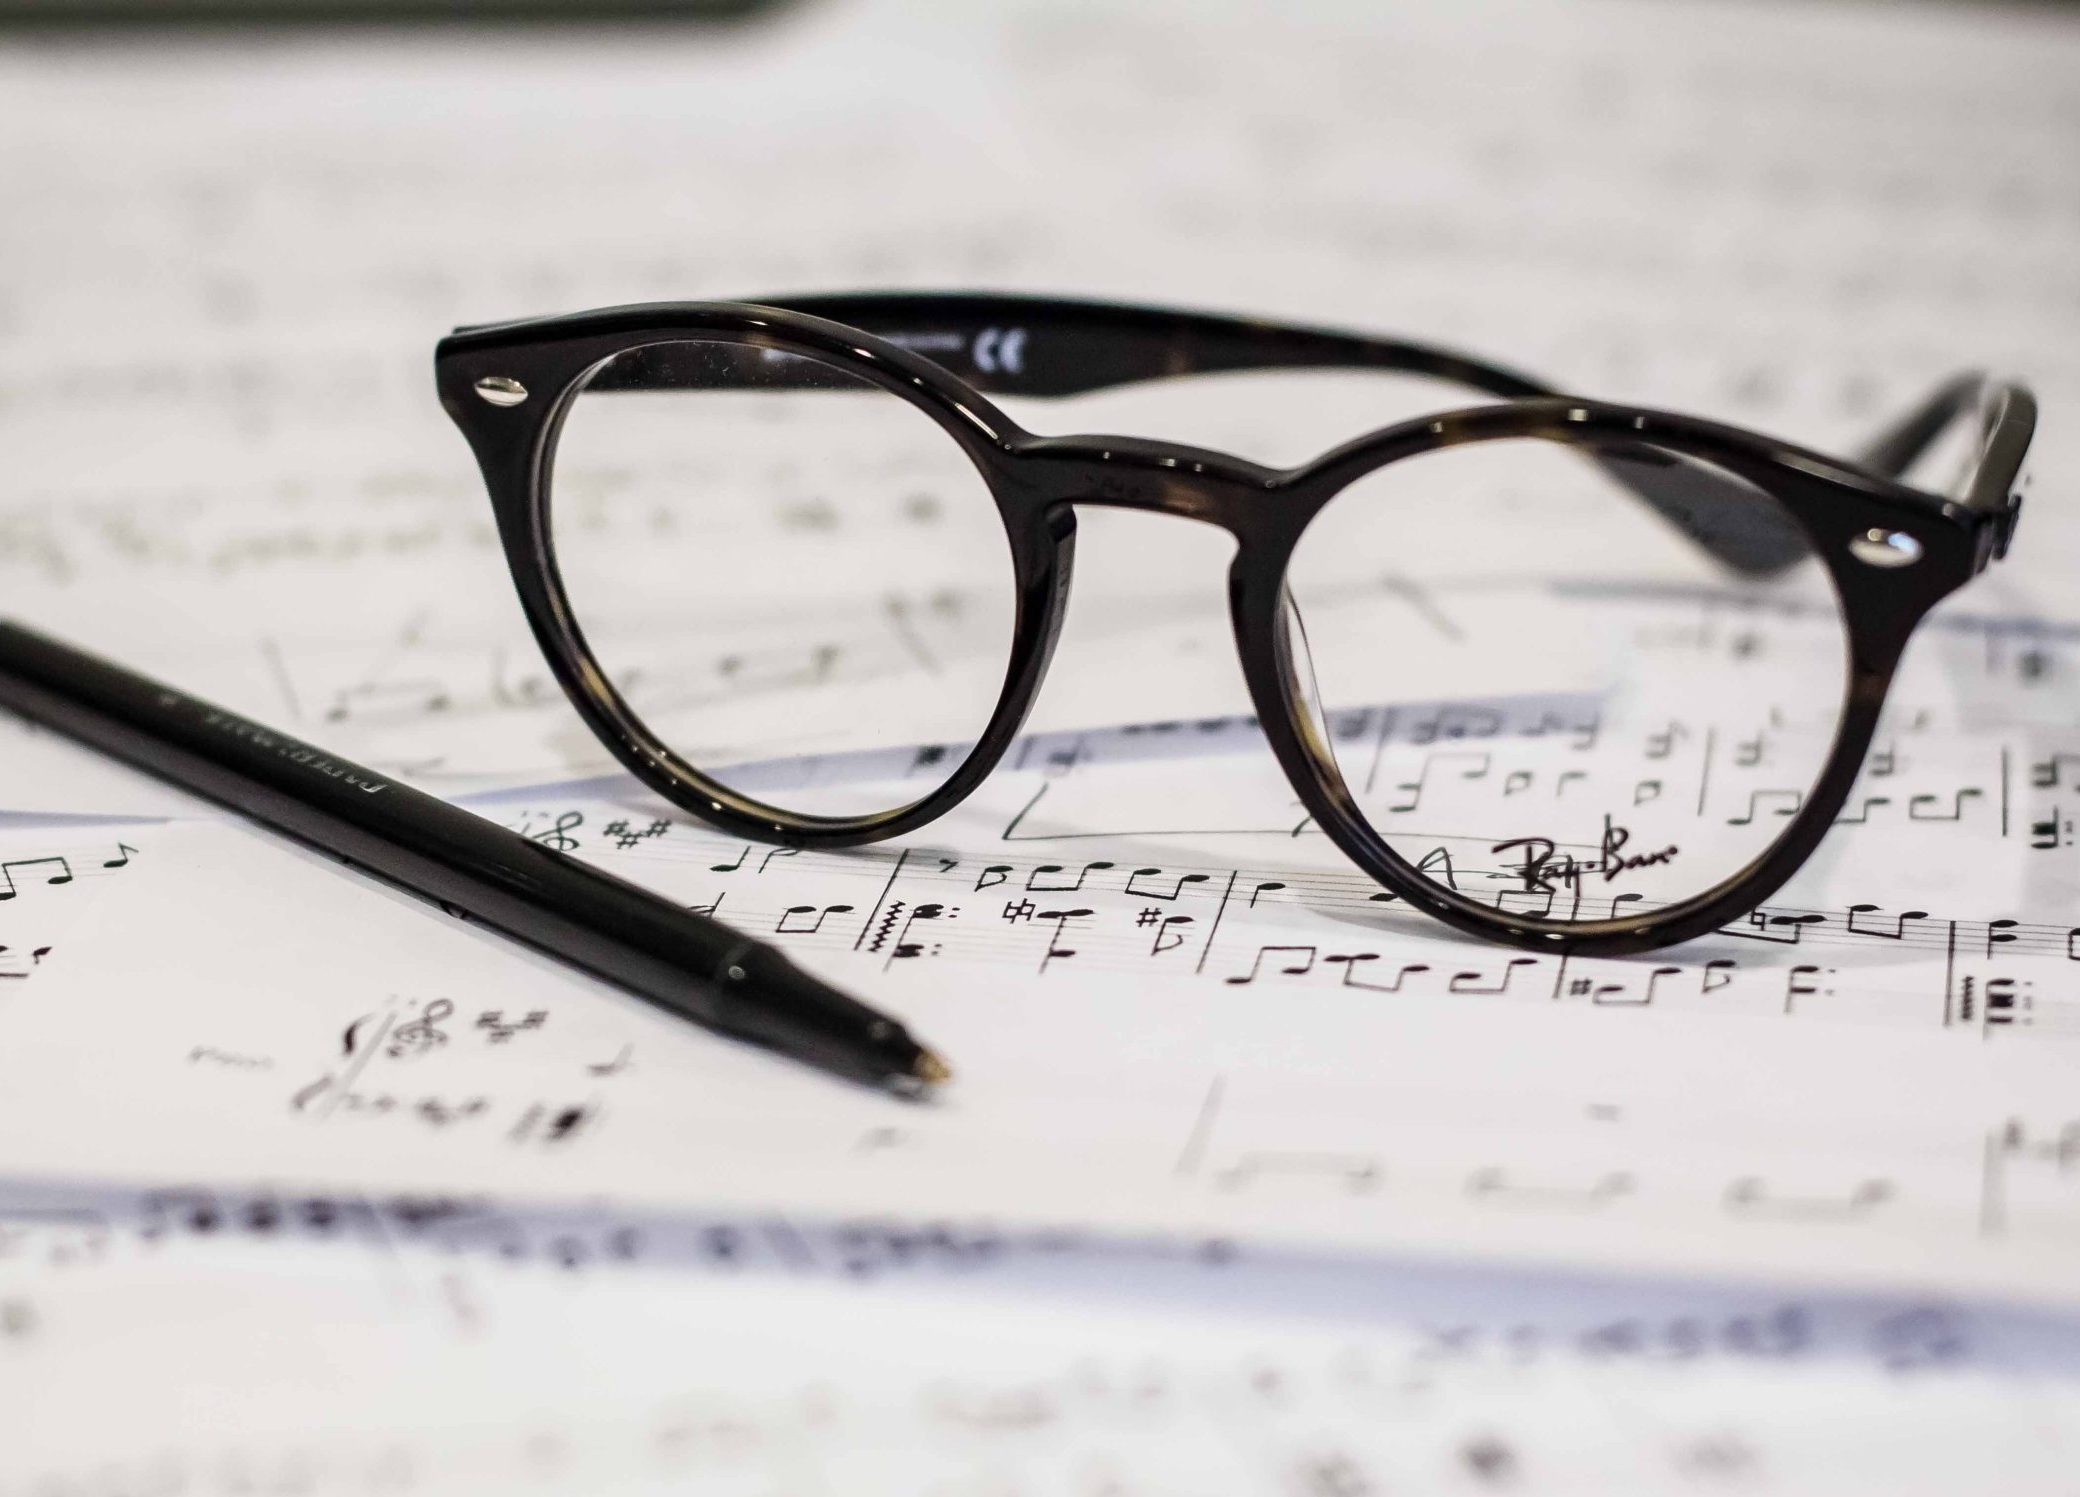 In an article about classical music, a pile of sheet music with a pair of black glasses and a pen on top.